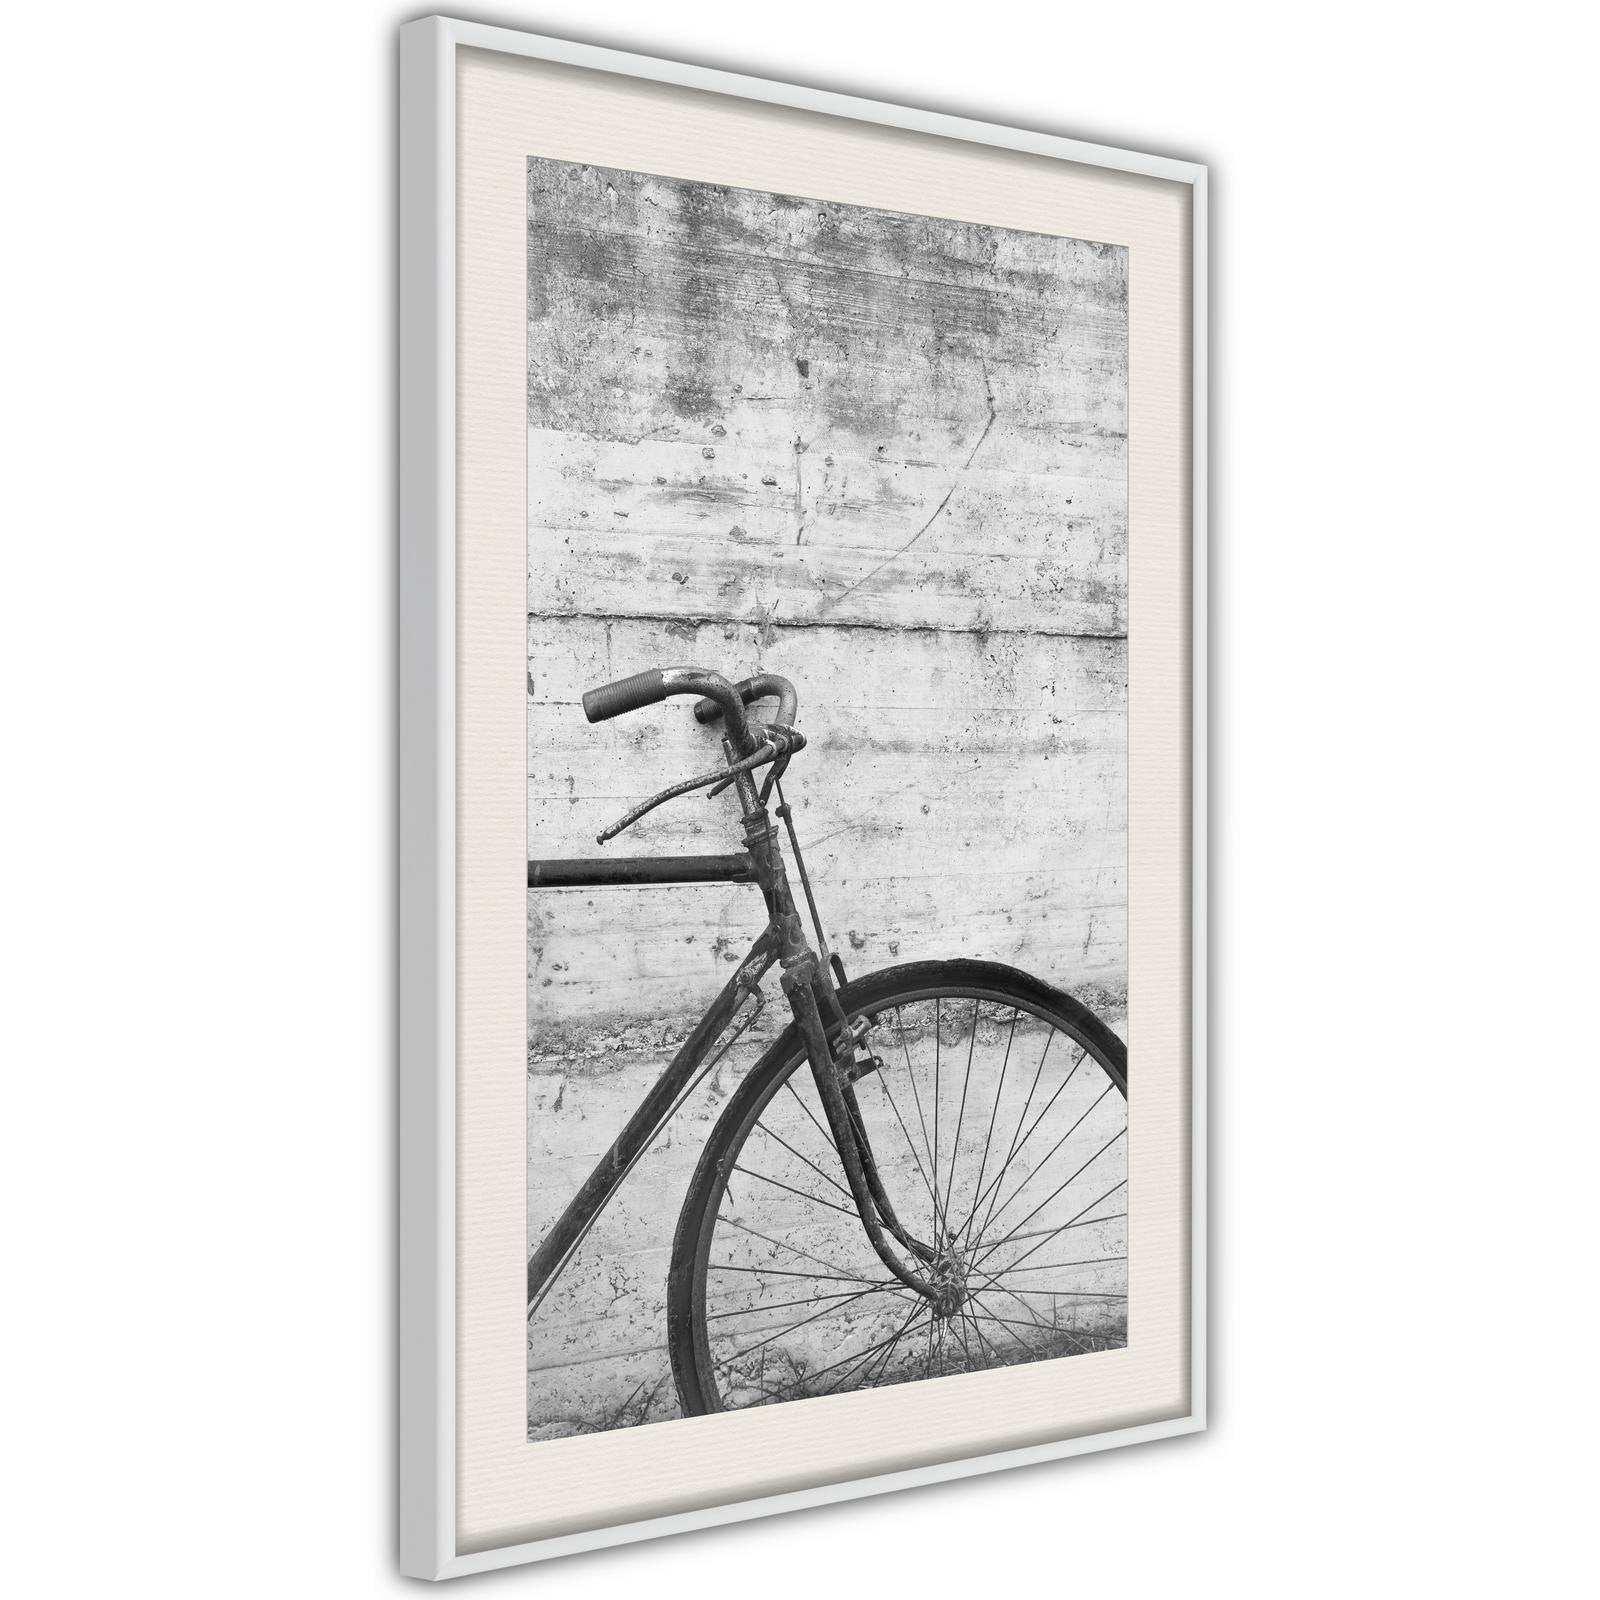 Inramad Poster / Tavla - Bicycle Leaning Against the Wall-Poster Inramad-Artgeist-peaceofhome.se